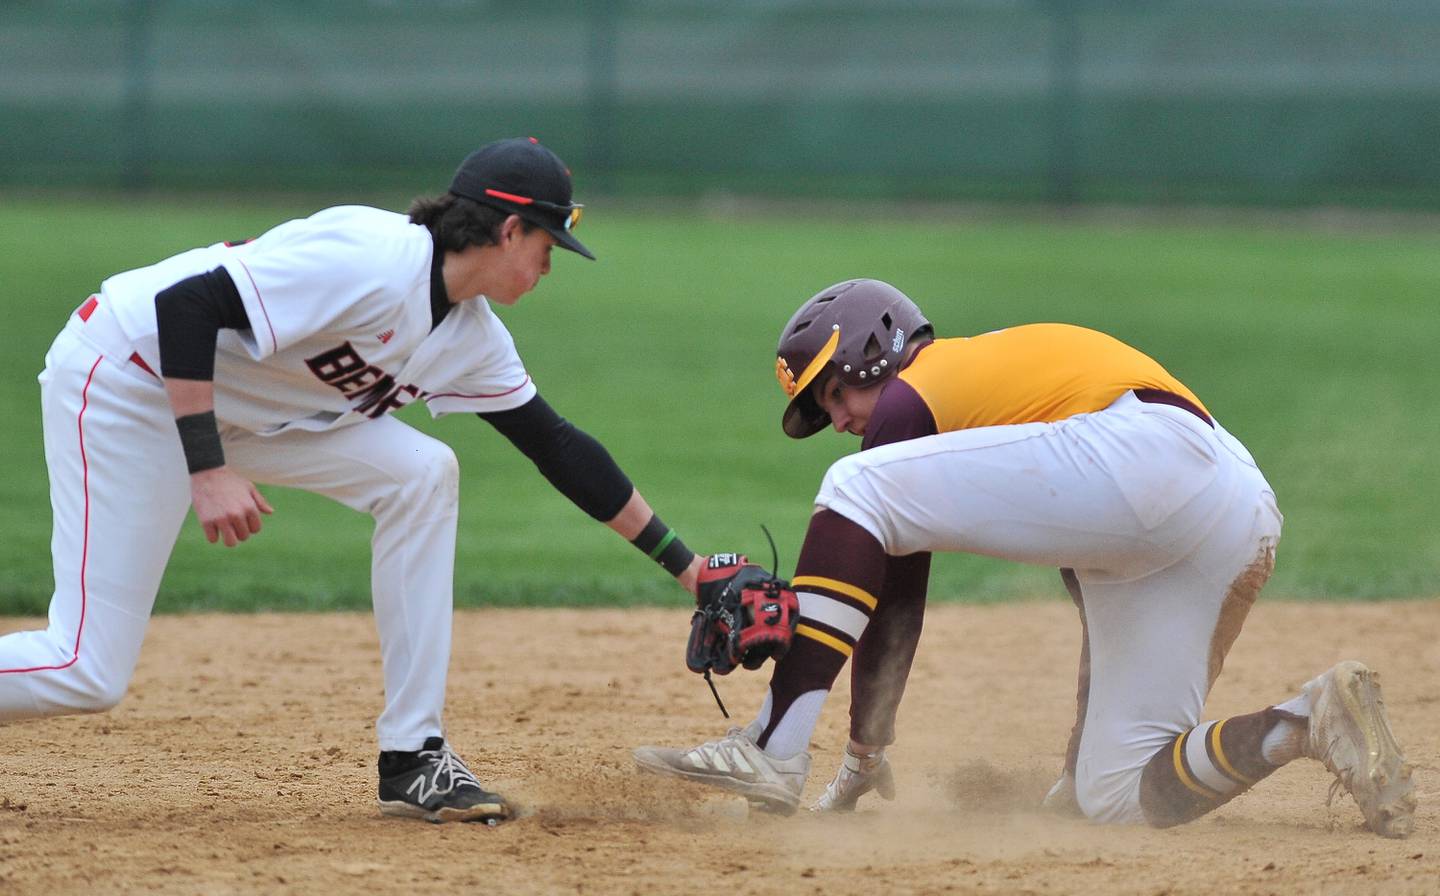 Montini's Michael Wind (right) arrives safely at second base with a double as Benet's Marc Iozzo makes a late tag  during a game on Apr. 28, 2022 at Benet Academy in Lisle.